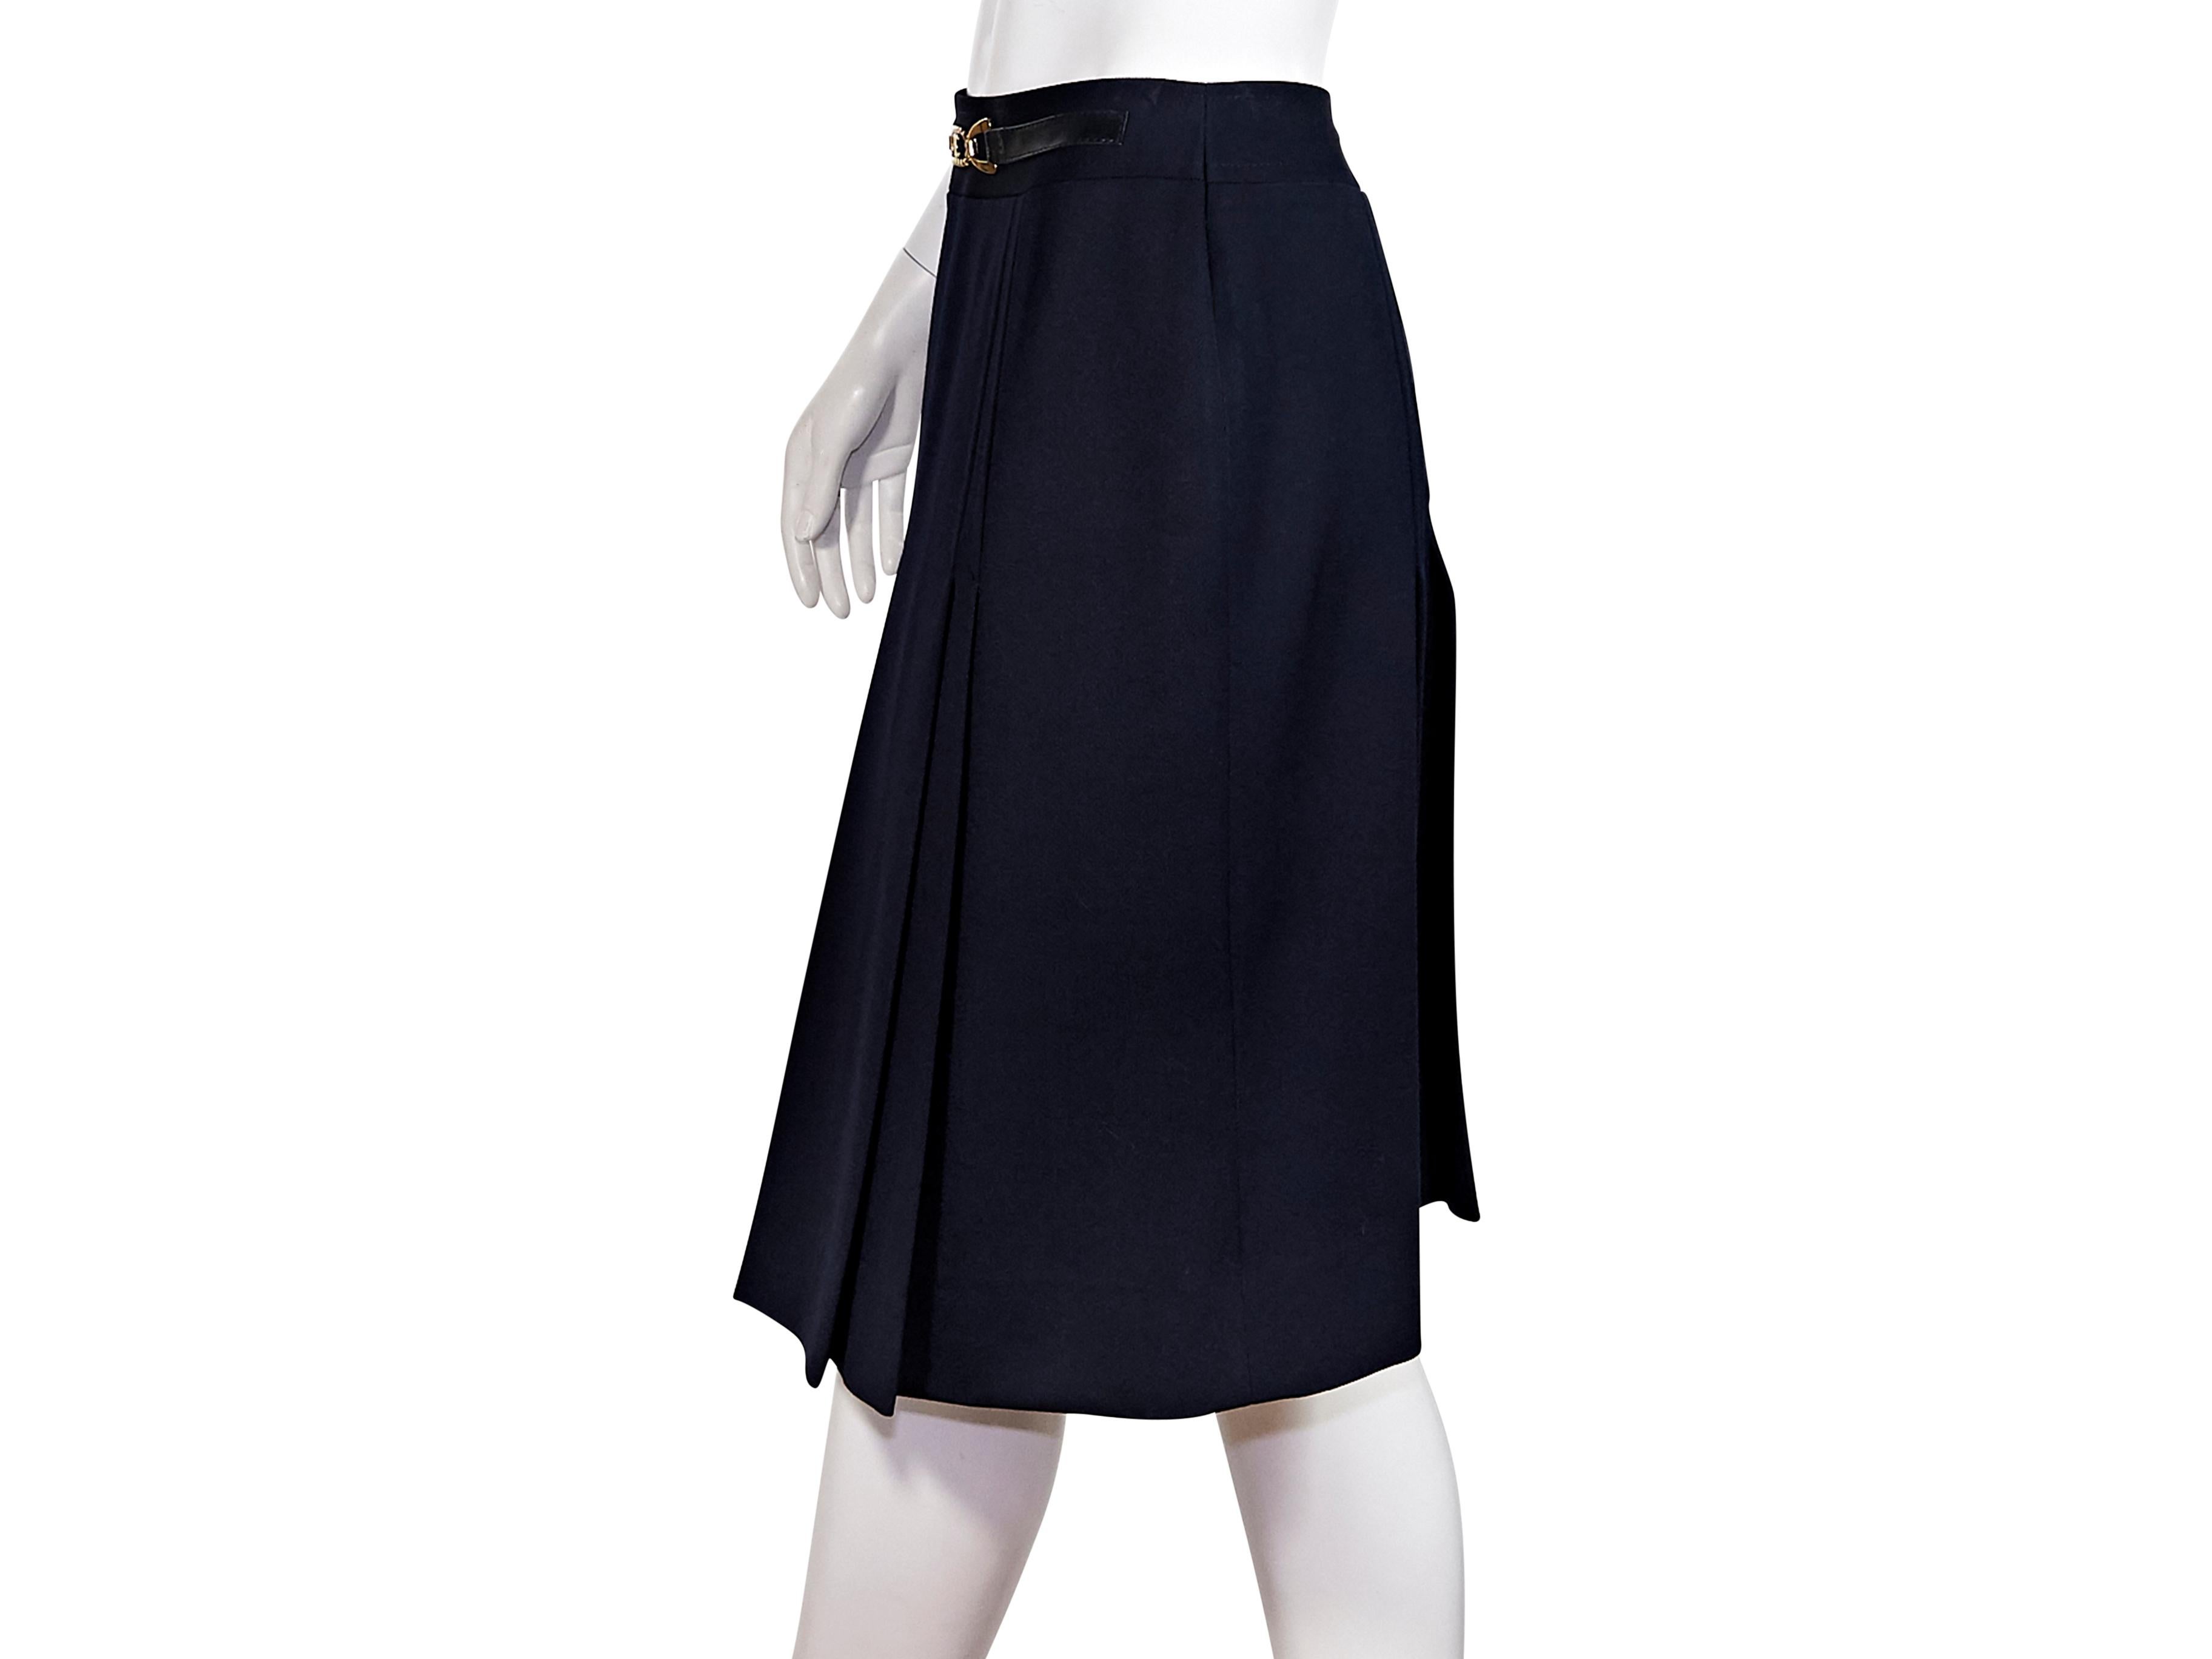 Product details:  Vintage navy blue wool pleated skirt by Celine.  Circa the 1980s.  Banded waist with faux belted front.  Concealed back zip closure.  Goldtone hardware.  28